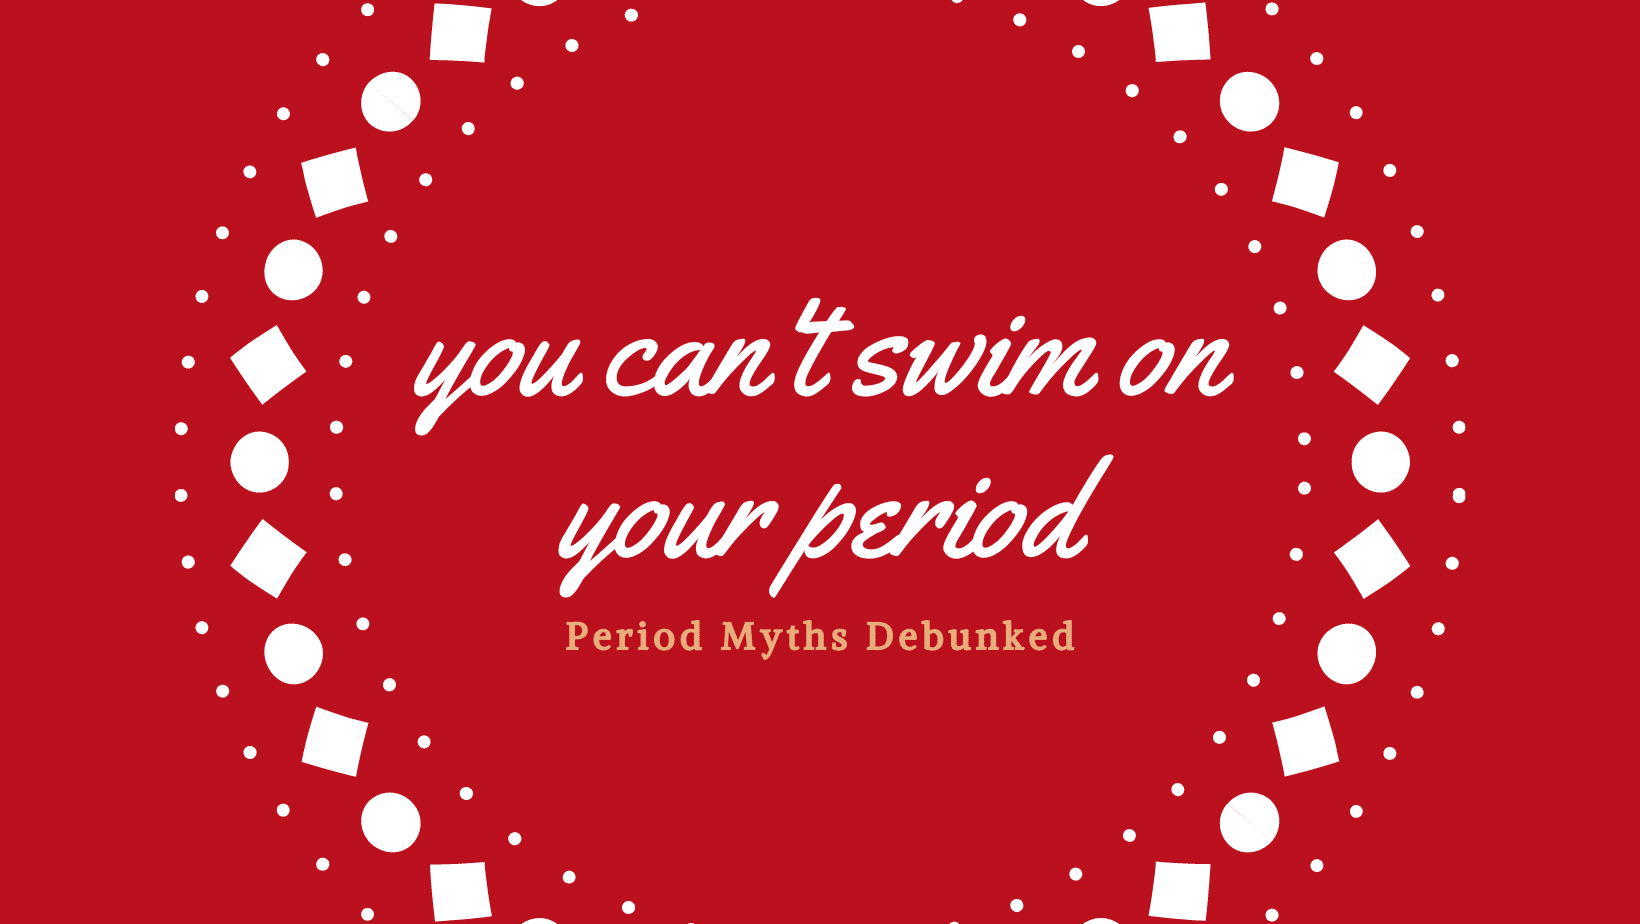 Graphic about debunking period myths that you can't swim on your period.